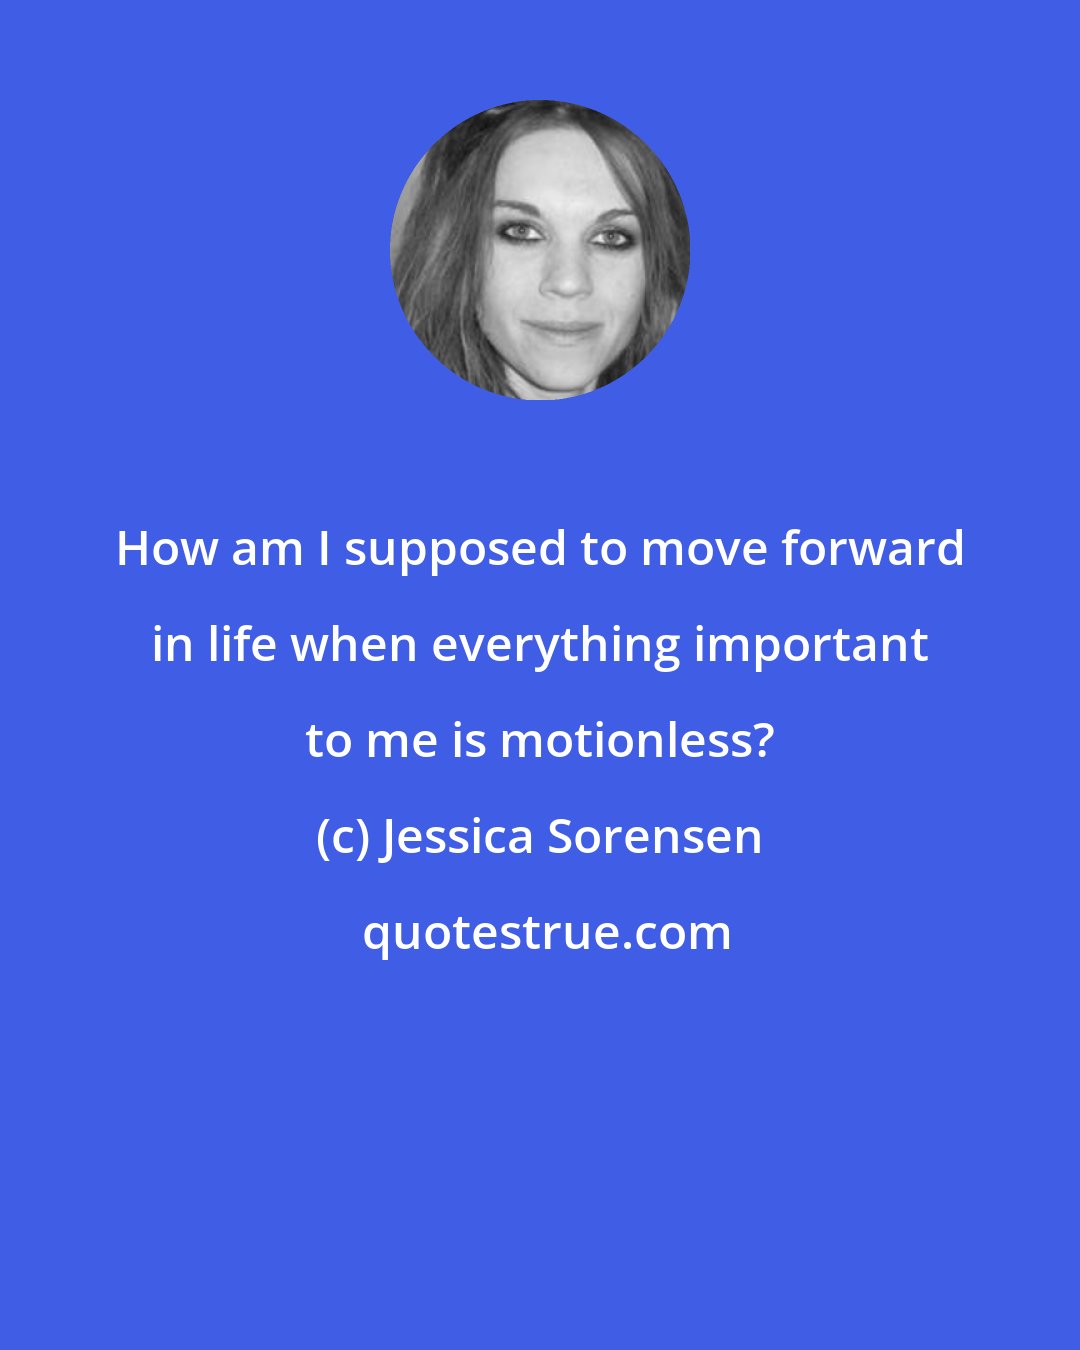 Jessica Sorensen: How am I supposed to move forward in life when everything important to me is motionless?